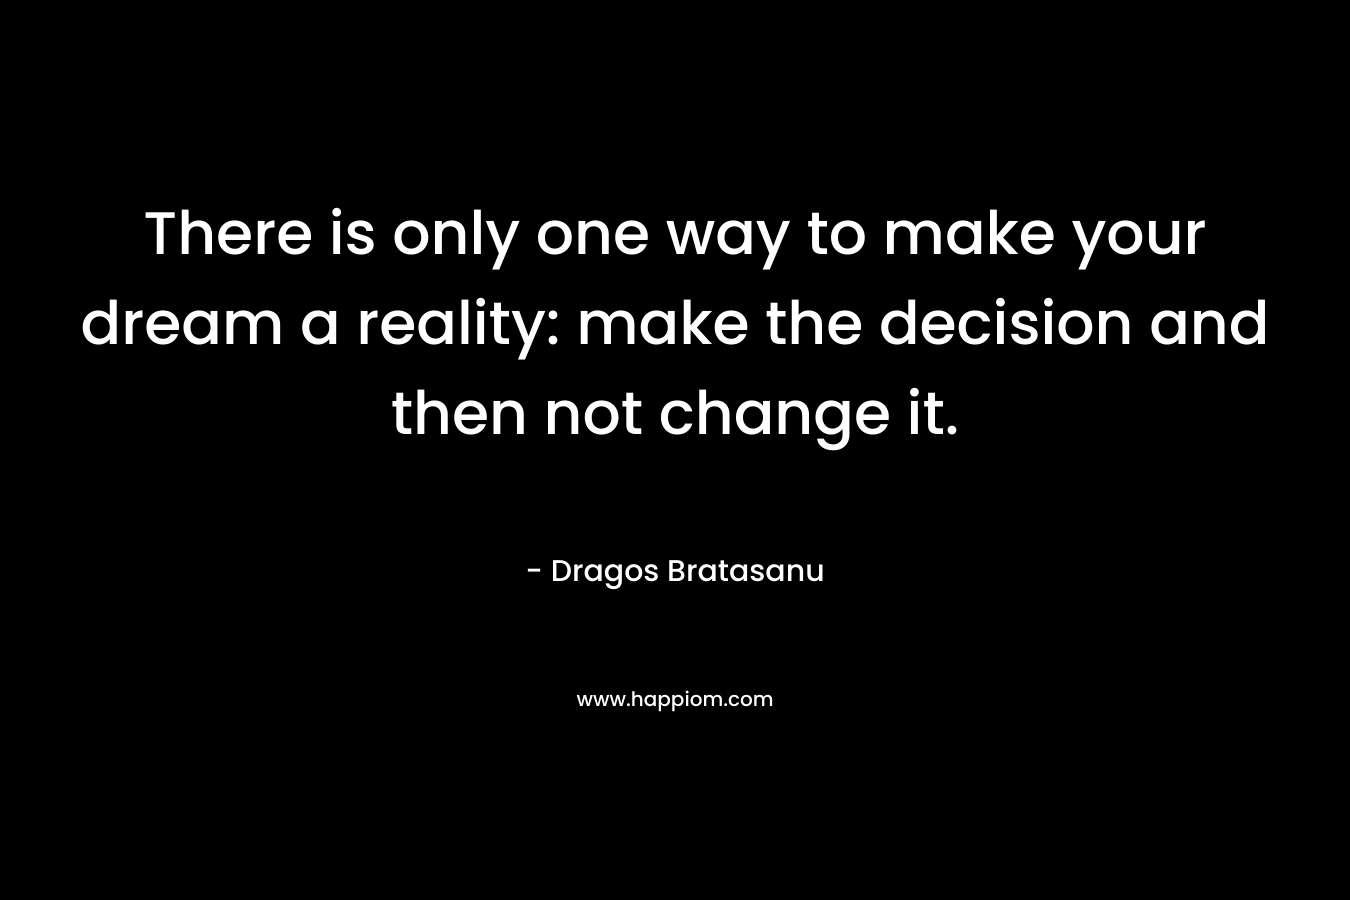 There is only one way to make your dream a reality: make the decision and then not change it.